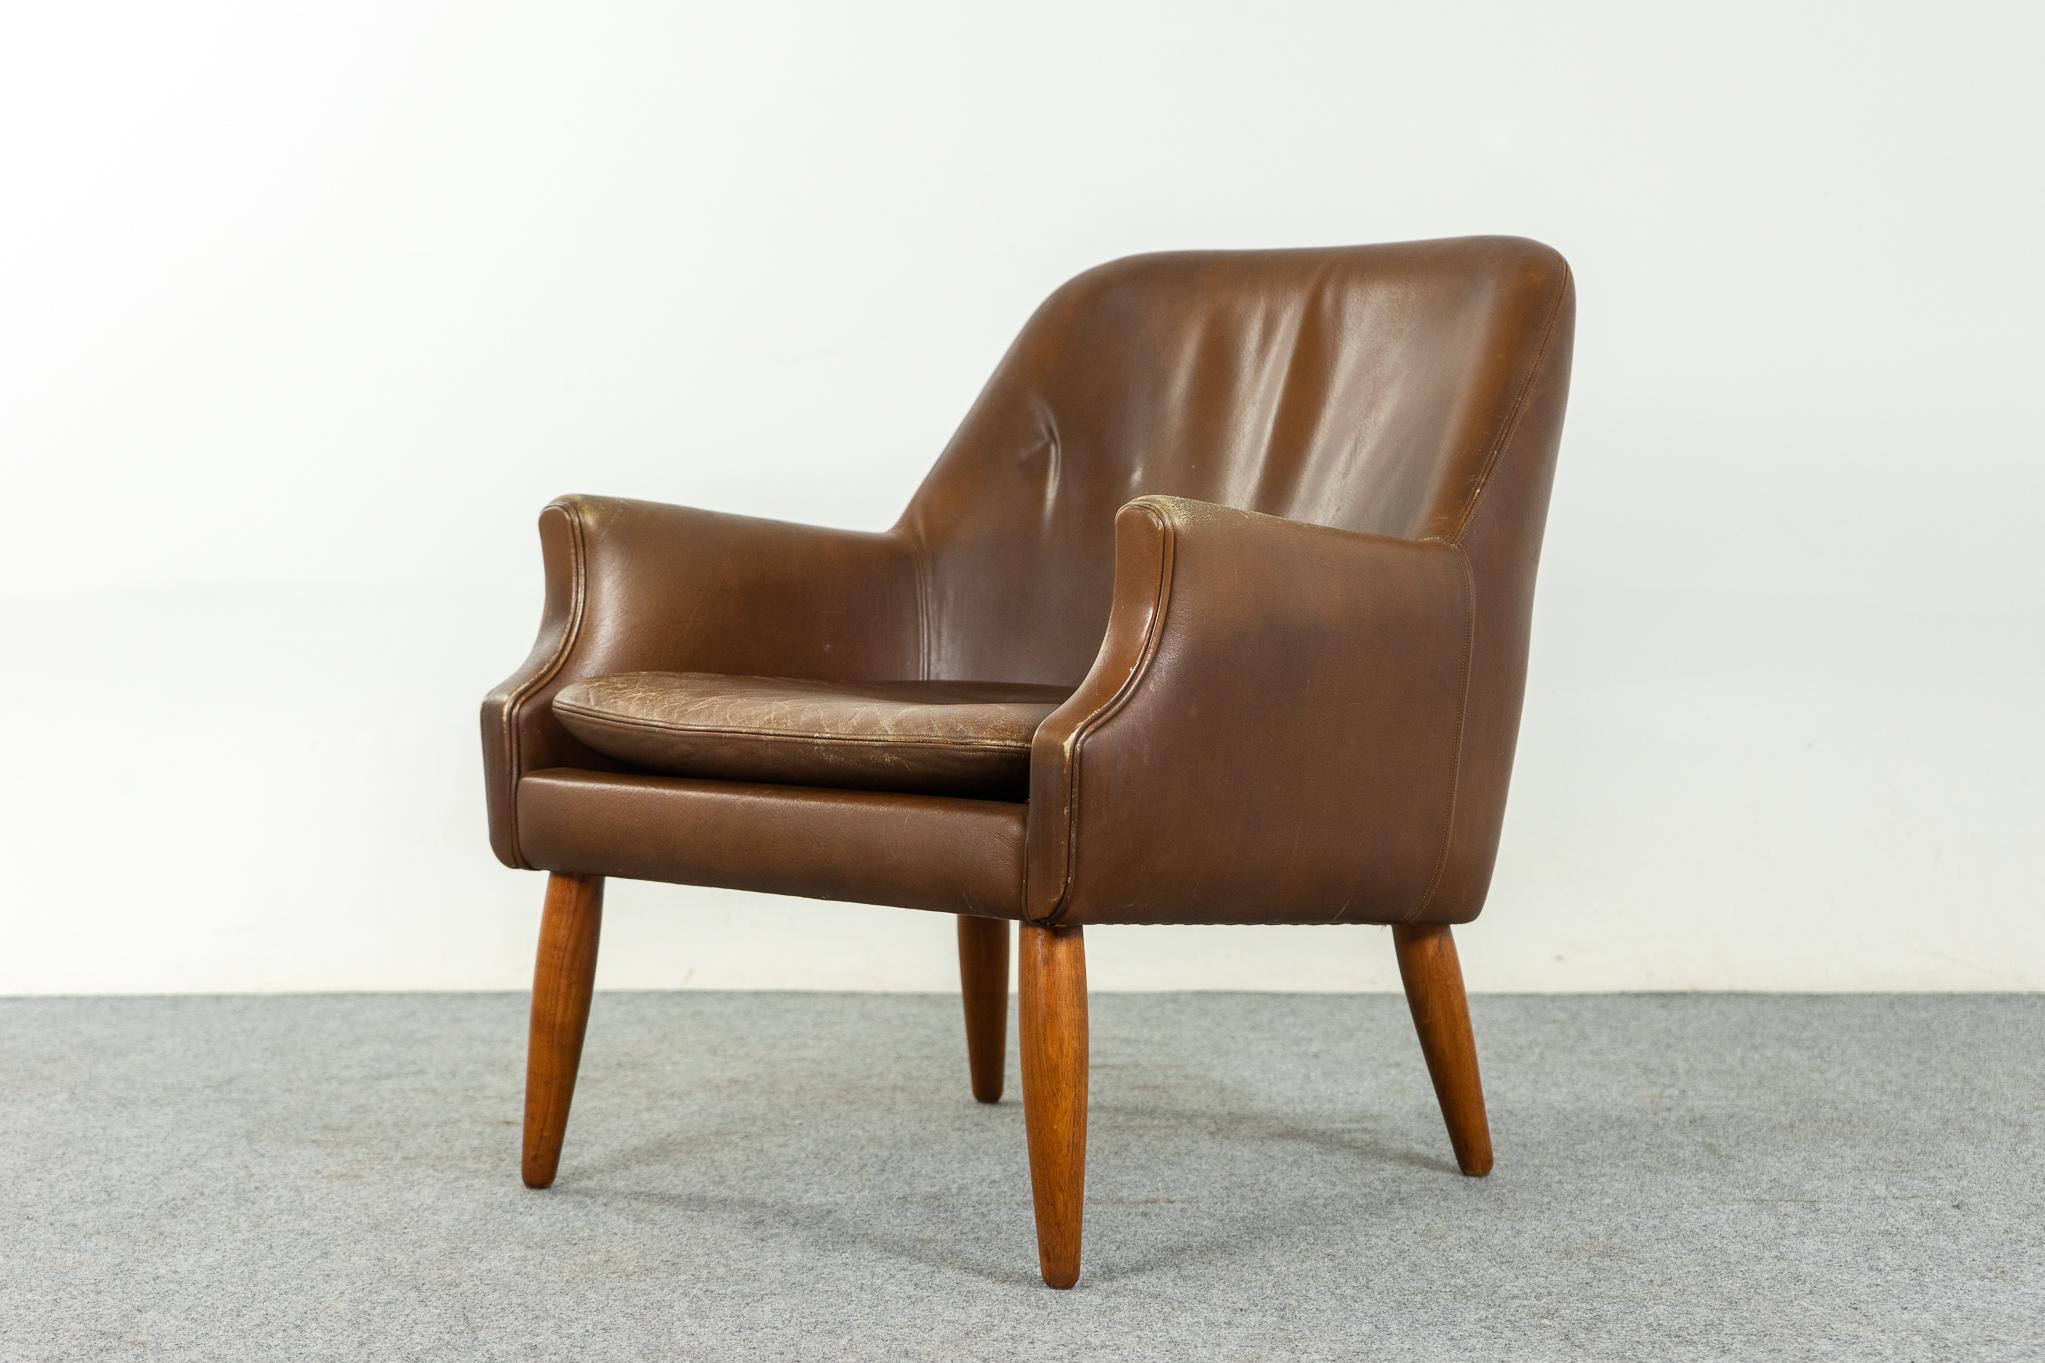 Leather & teak mid-century lounge chair, circa 1960's. Original brown leather with great patina, tapered, solid splayed teak legs!

Please inquire for international and remote shipping rates.